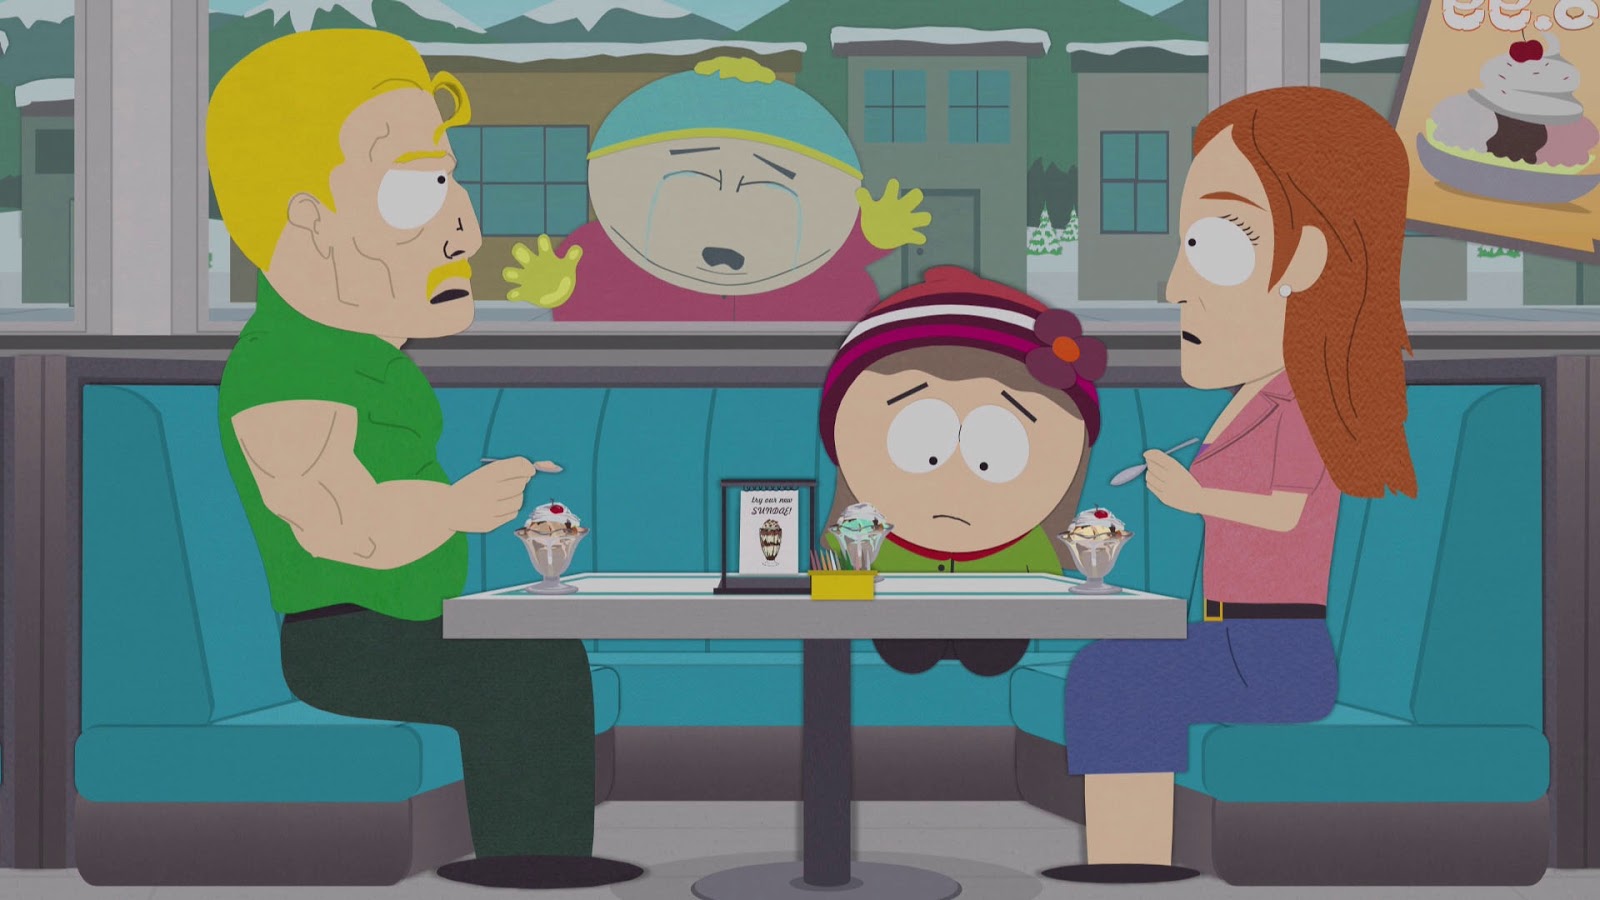 South Park - "Doubling Down" HD Screen Captures.